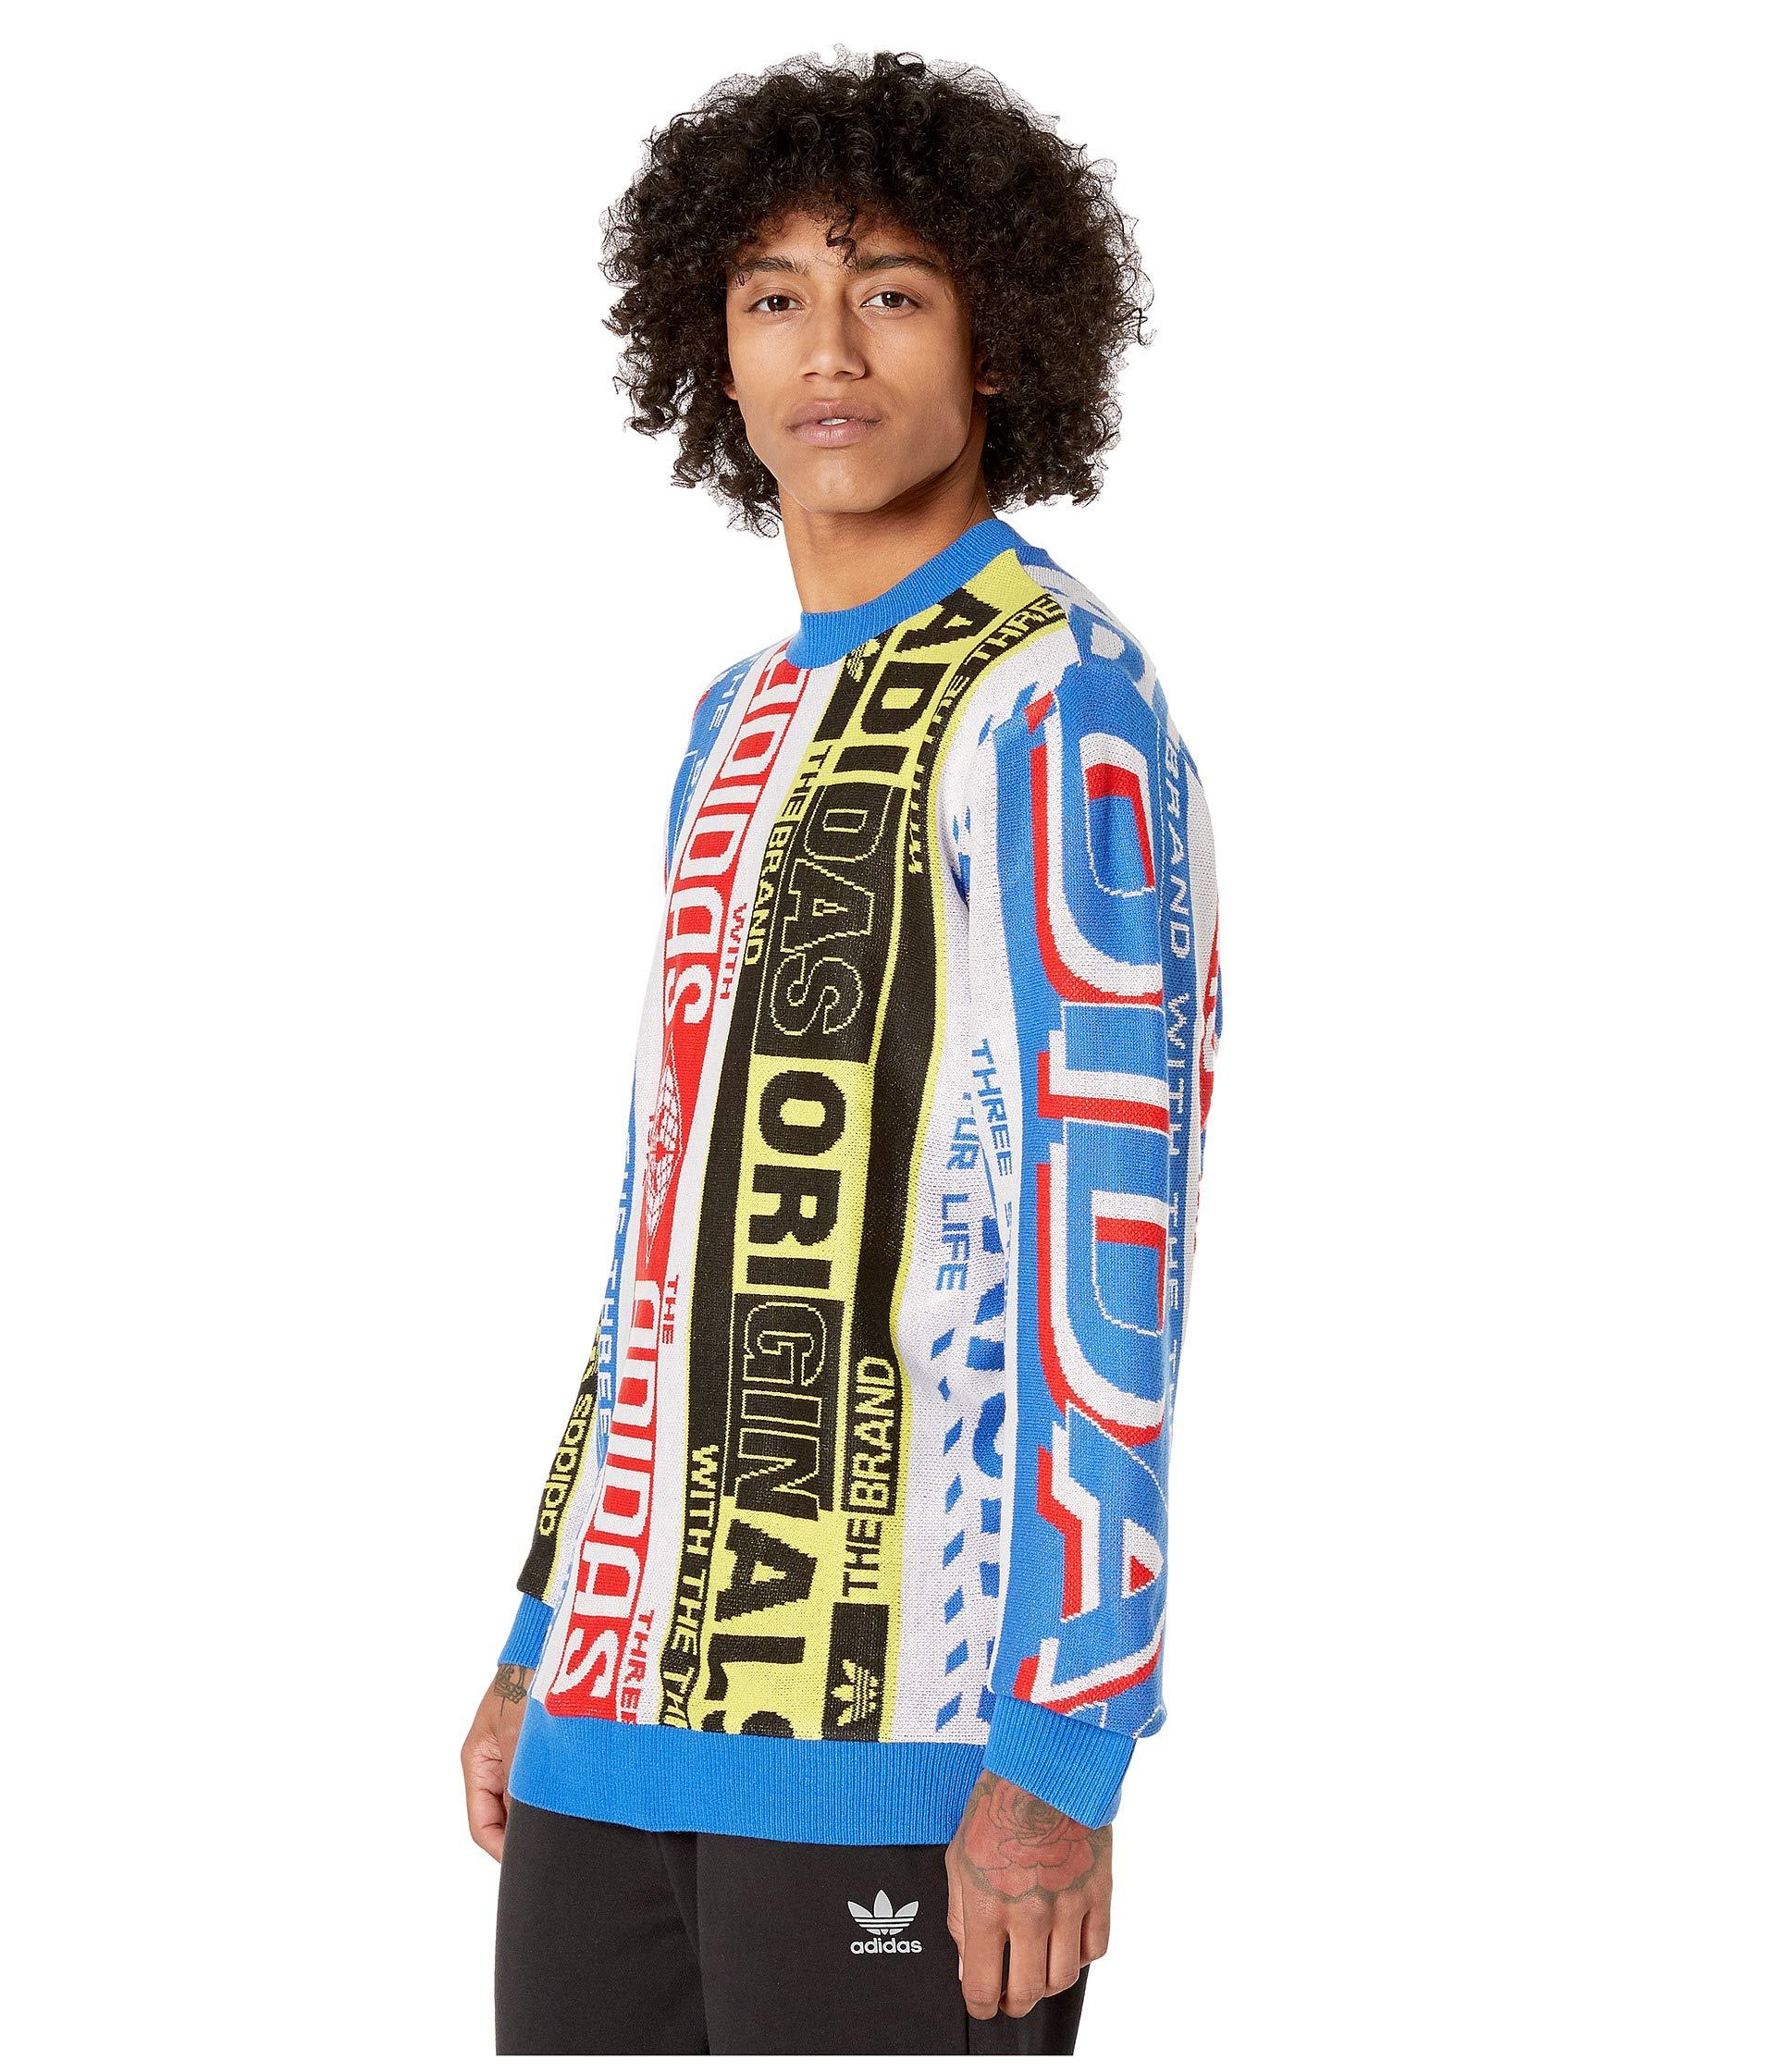 adidas Originals Scarf Knit Sweater in Blue for Men - Lyst